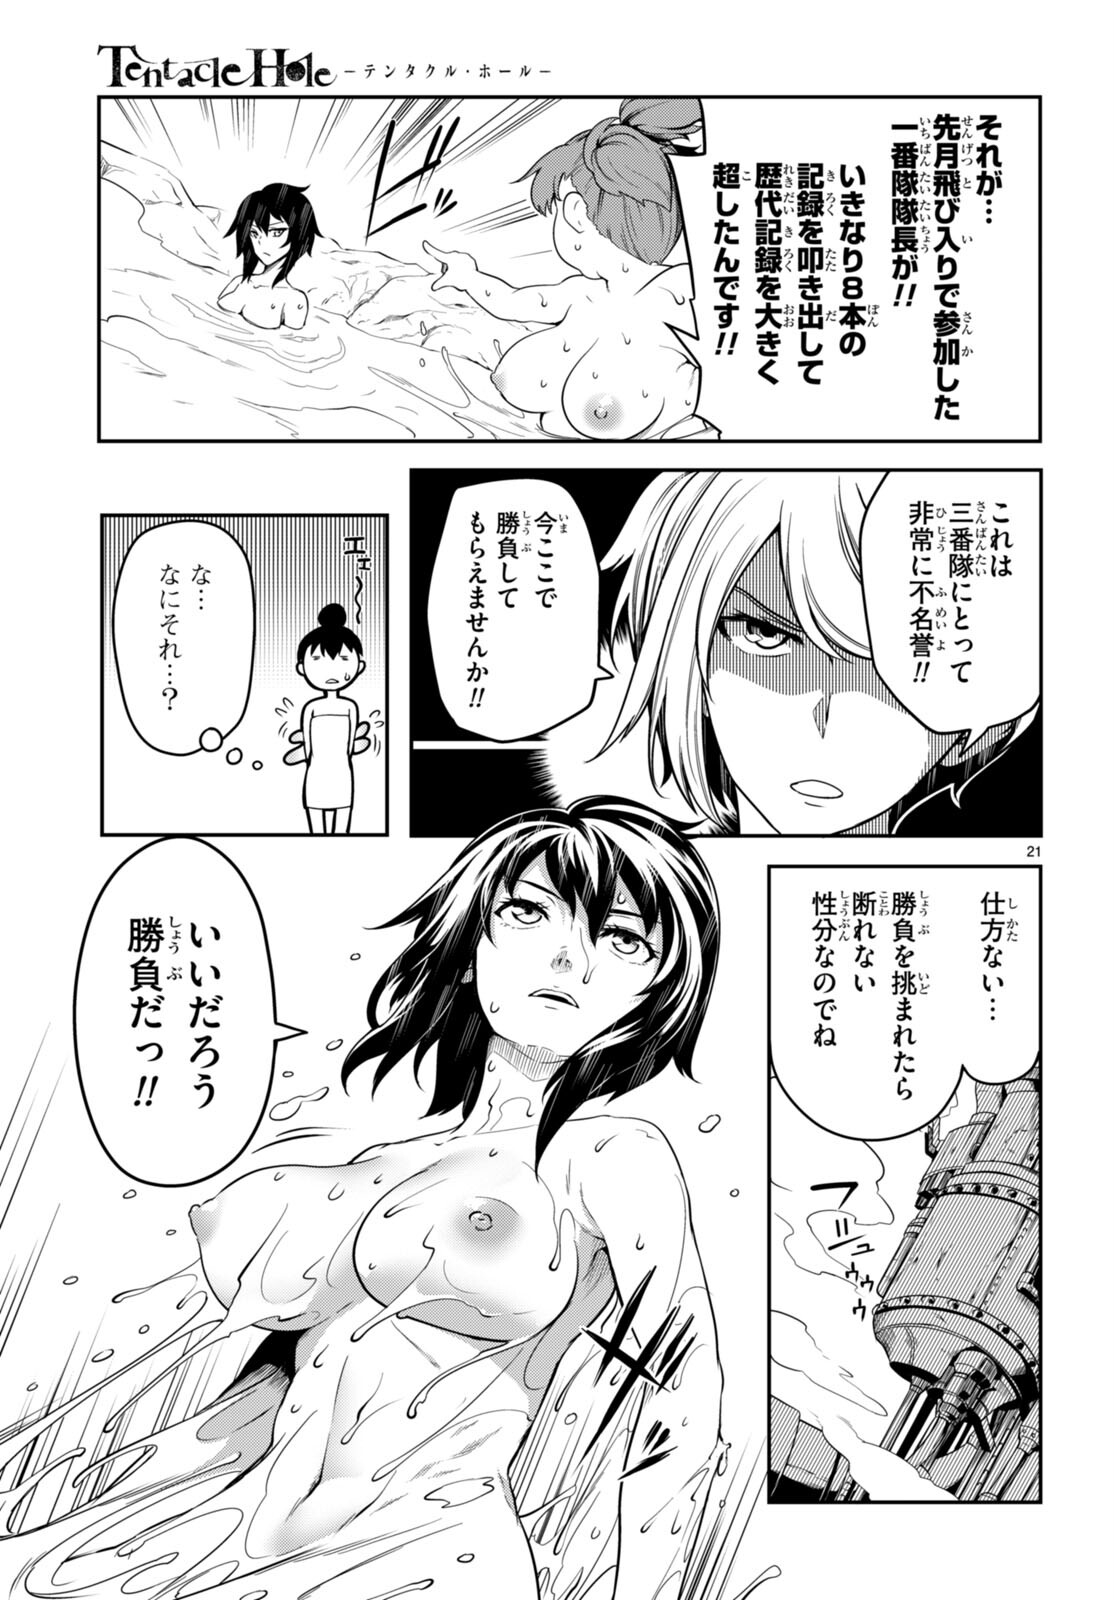 Tentacle Hole 第5.5話 - Page 21